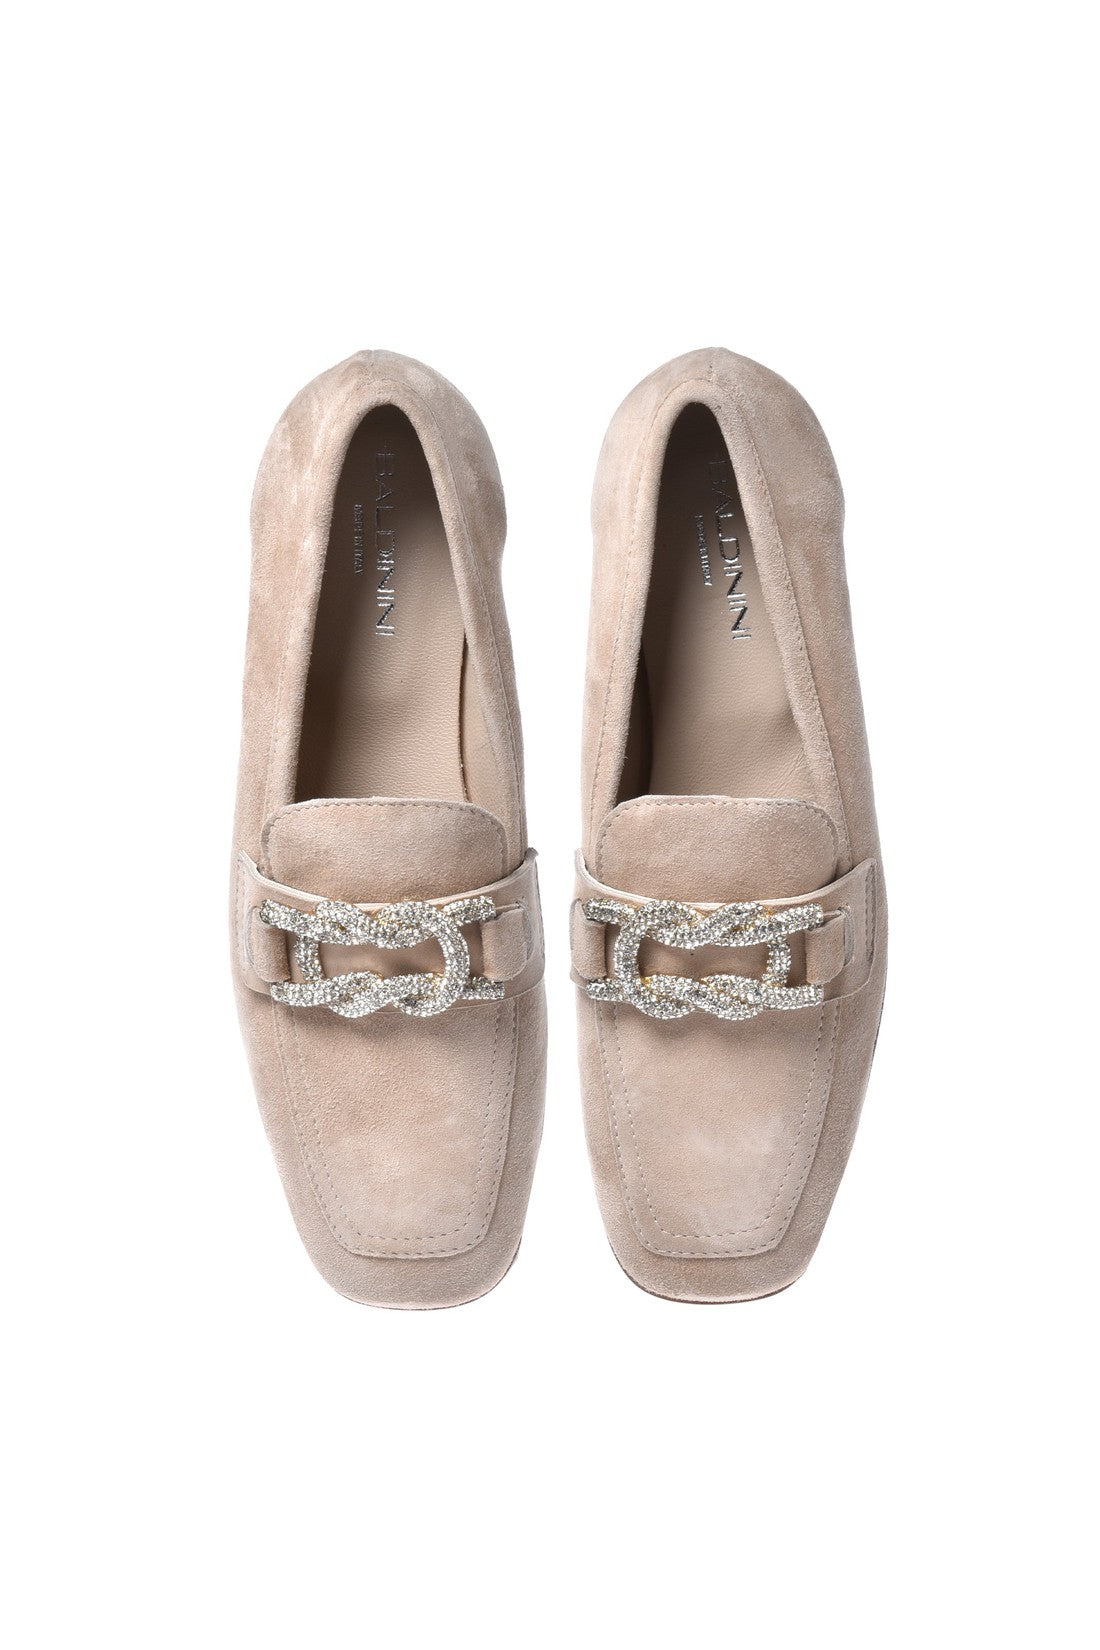 Loafer in taupe suede